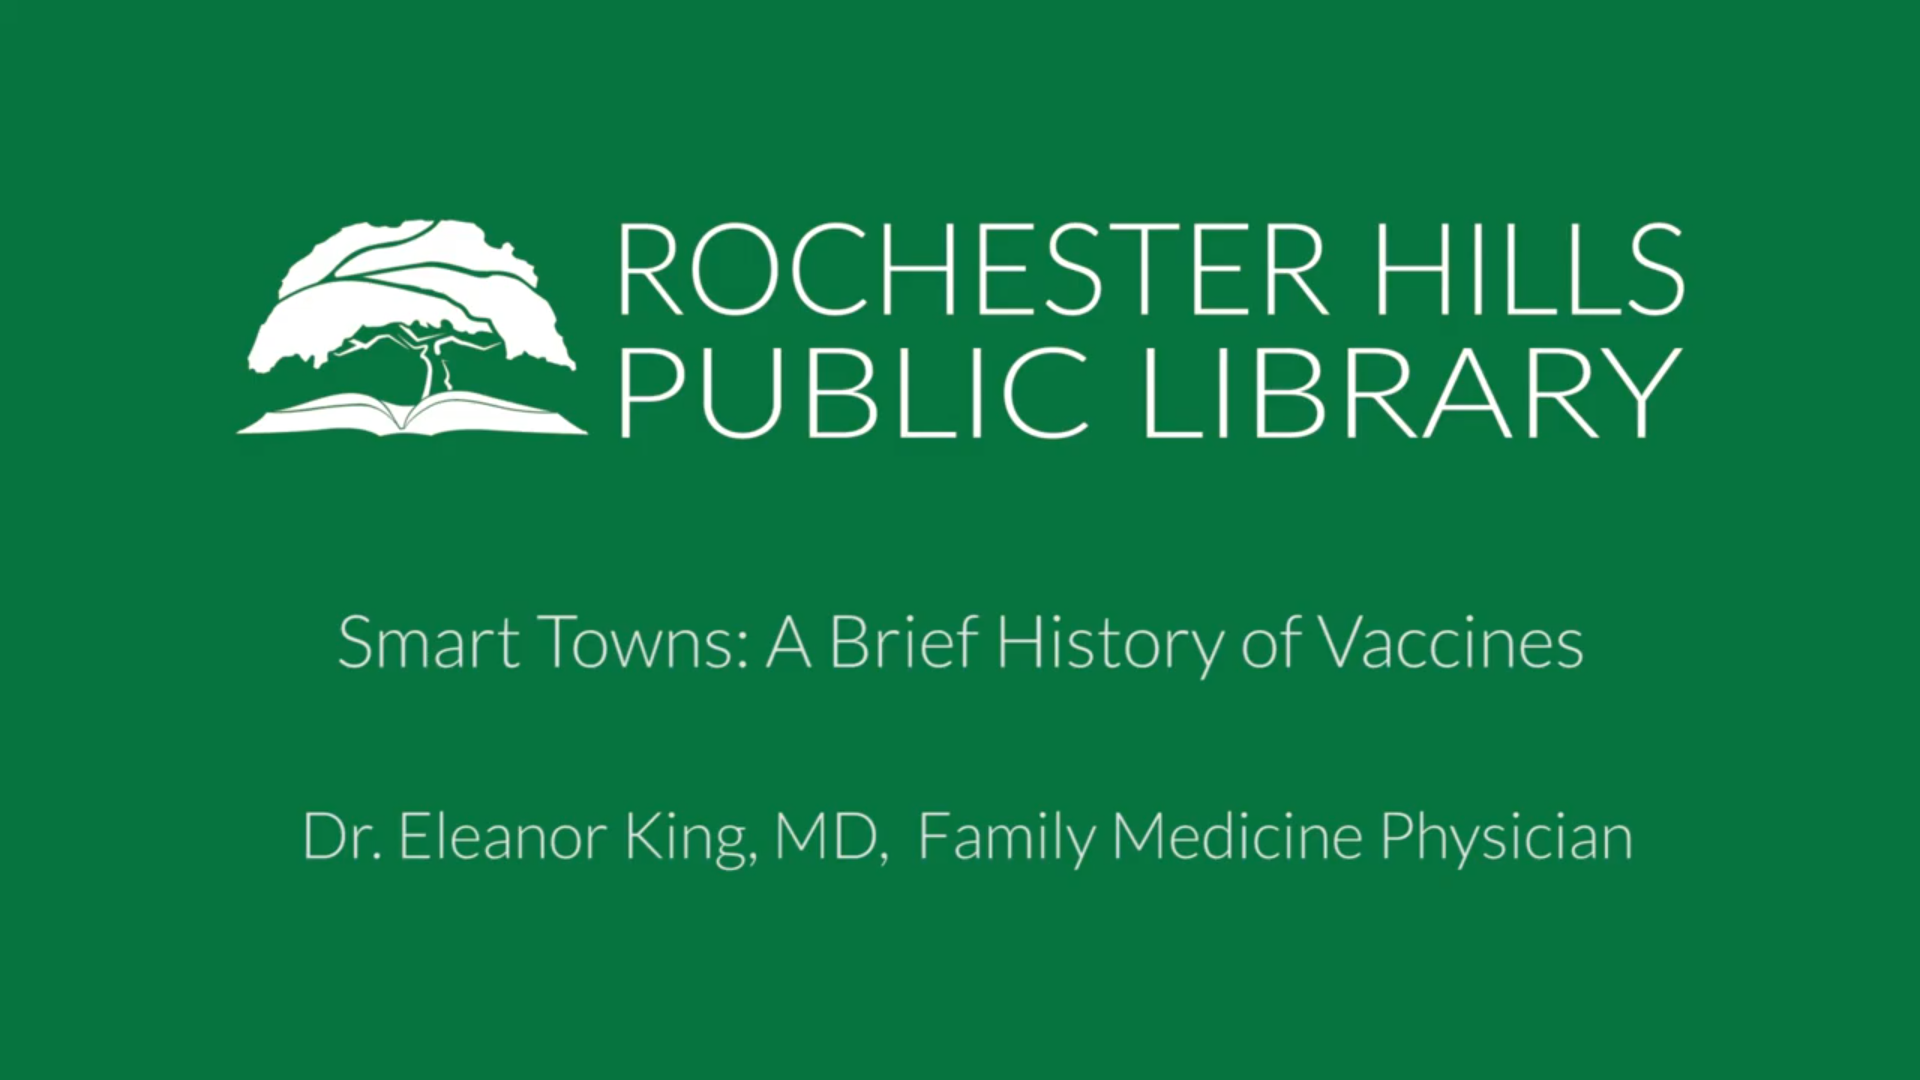 Smart Towns: A Brief History of Vaccines